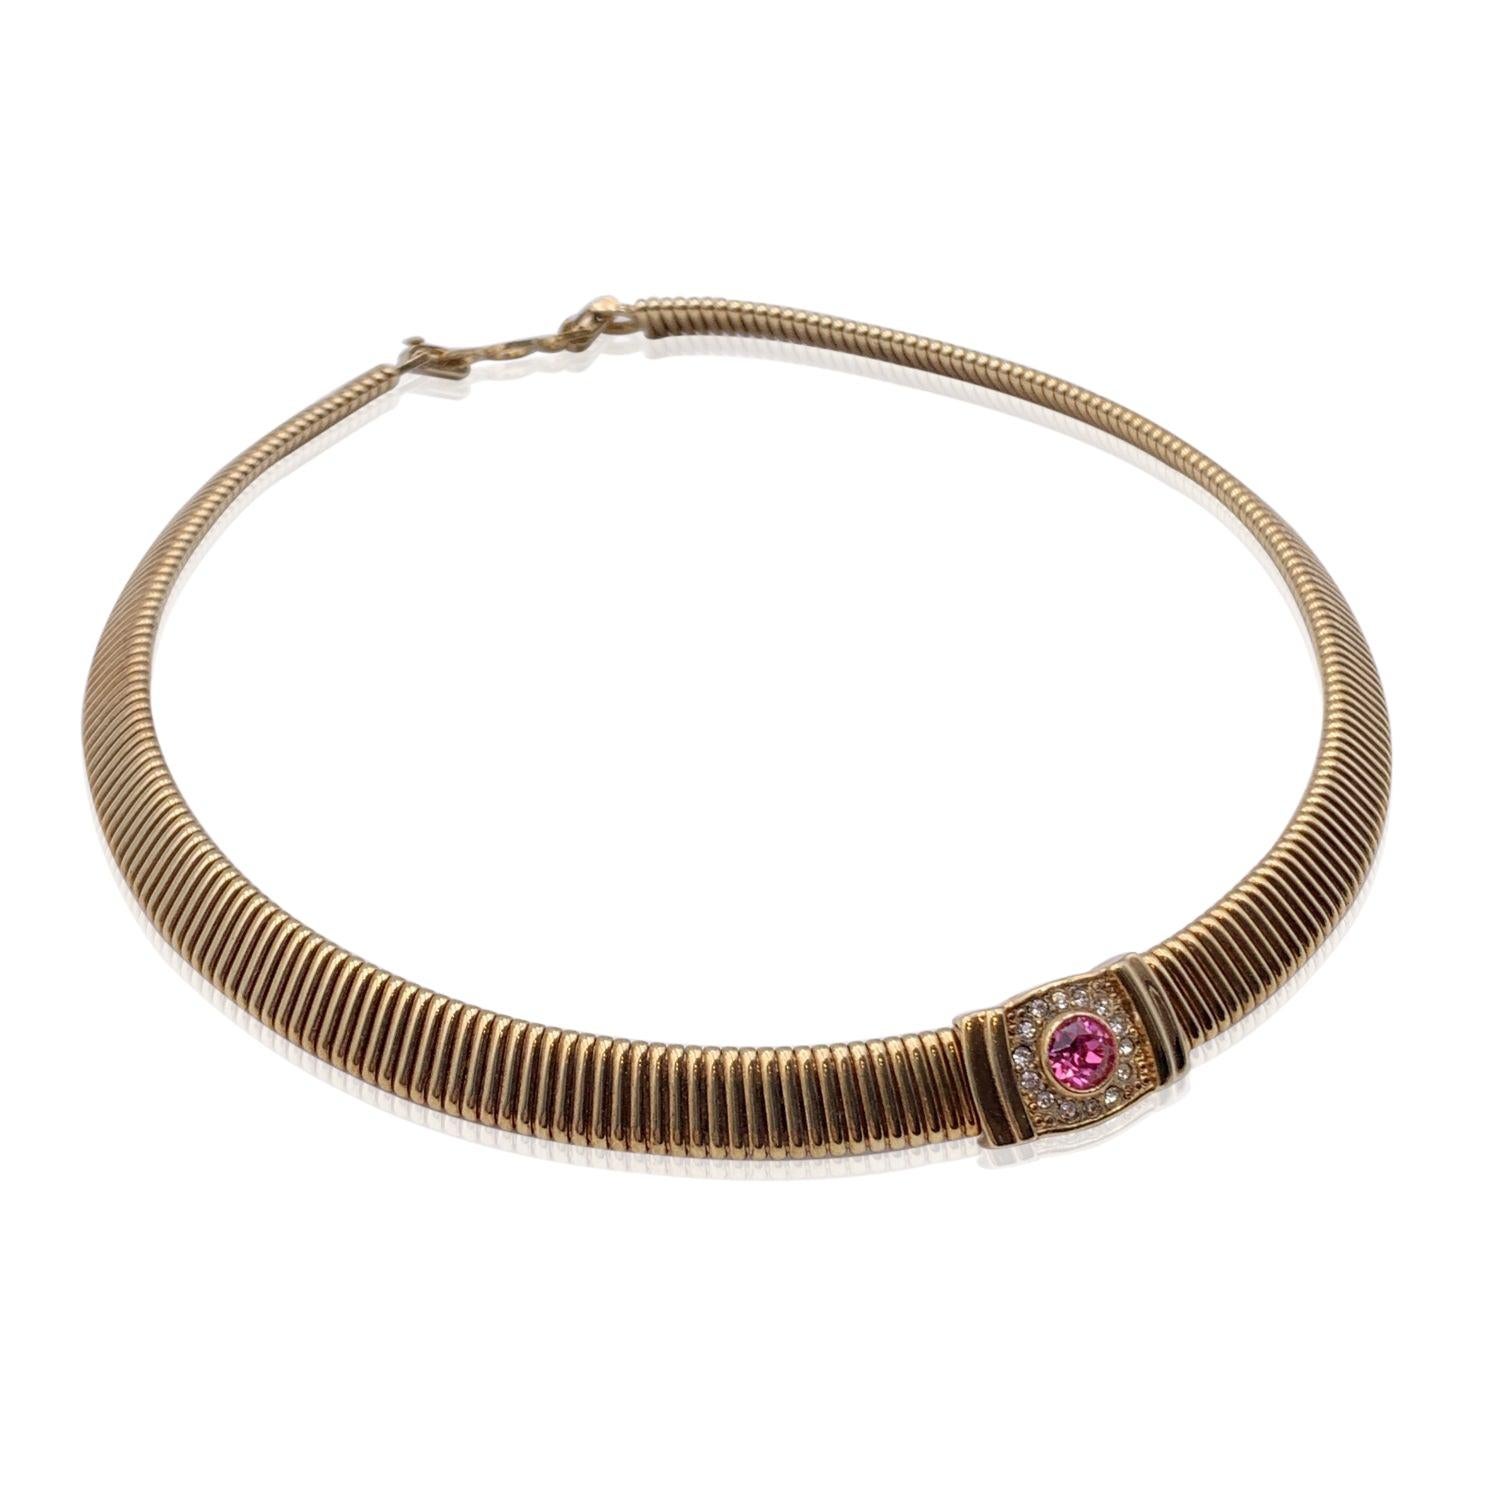 Vintage Christian Dior gold metal necklace with pink and white crystals. Central rectangular motif, an oval cabochon round pink crystal ​​and a brilliant cut diamond surround. 'Ch. Dior' engraved on the reverse of the closure. Condition A -